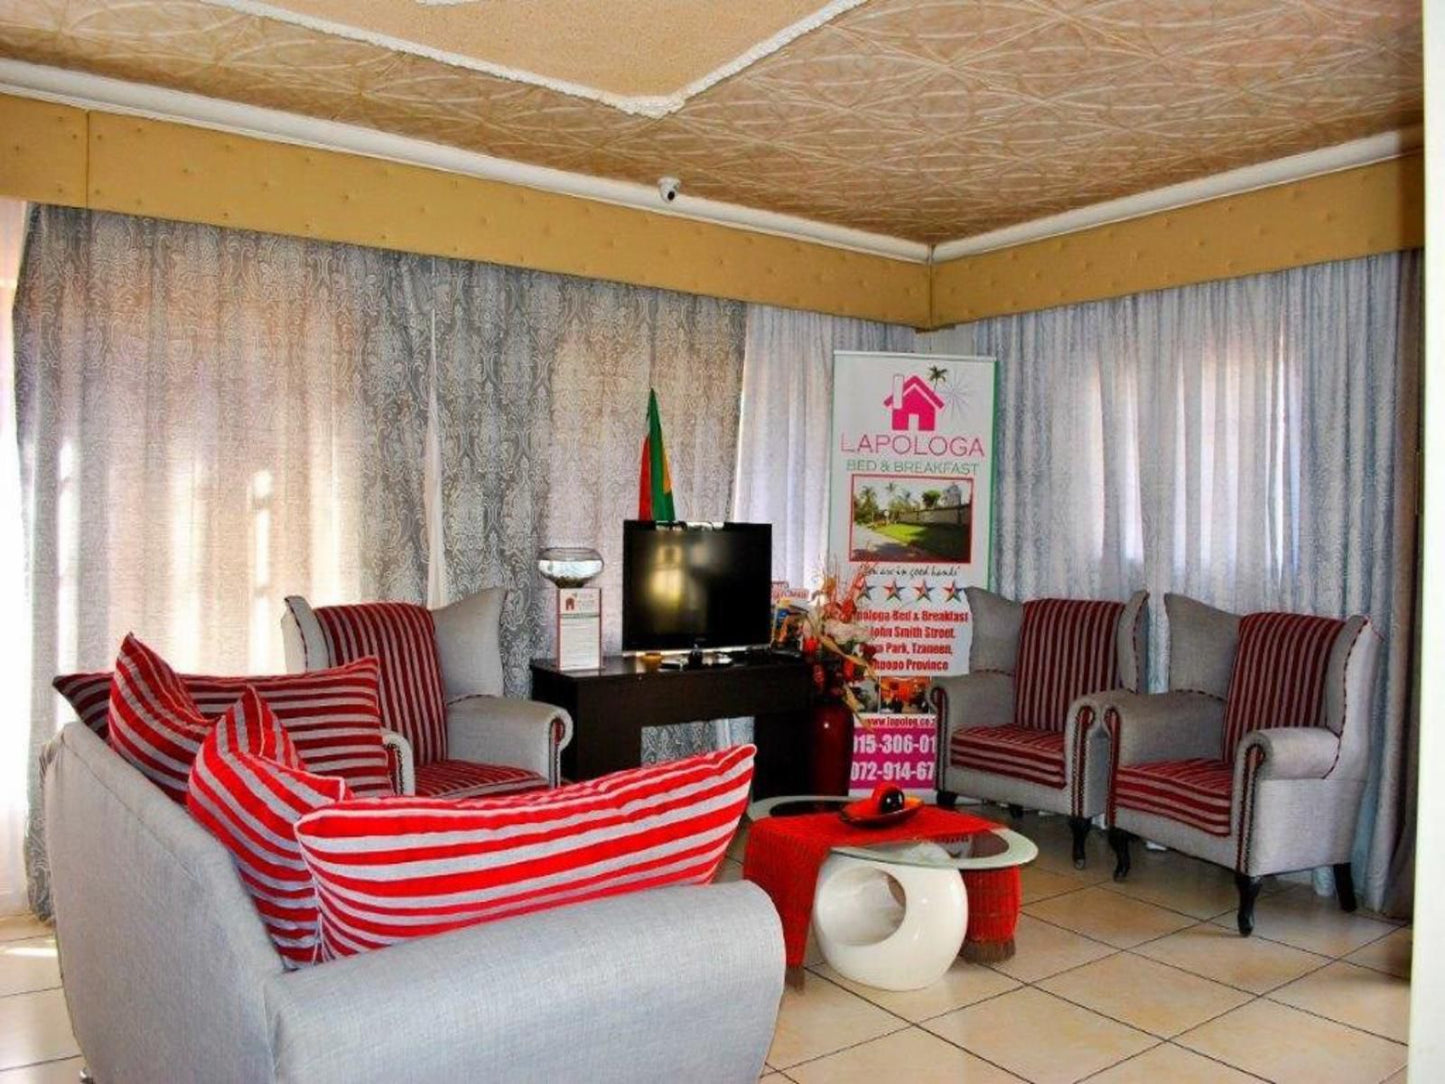 Lapologa Tzaneen Limpopo Province South Africa Living Room